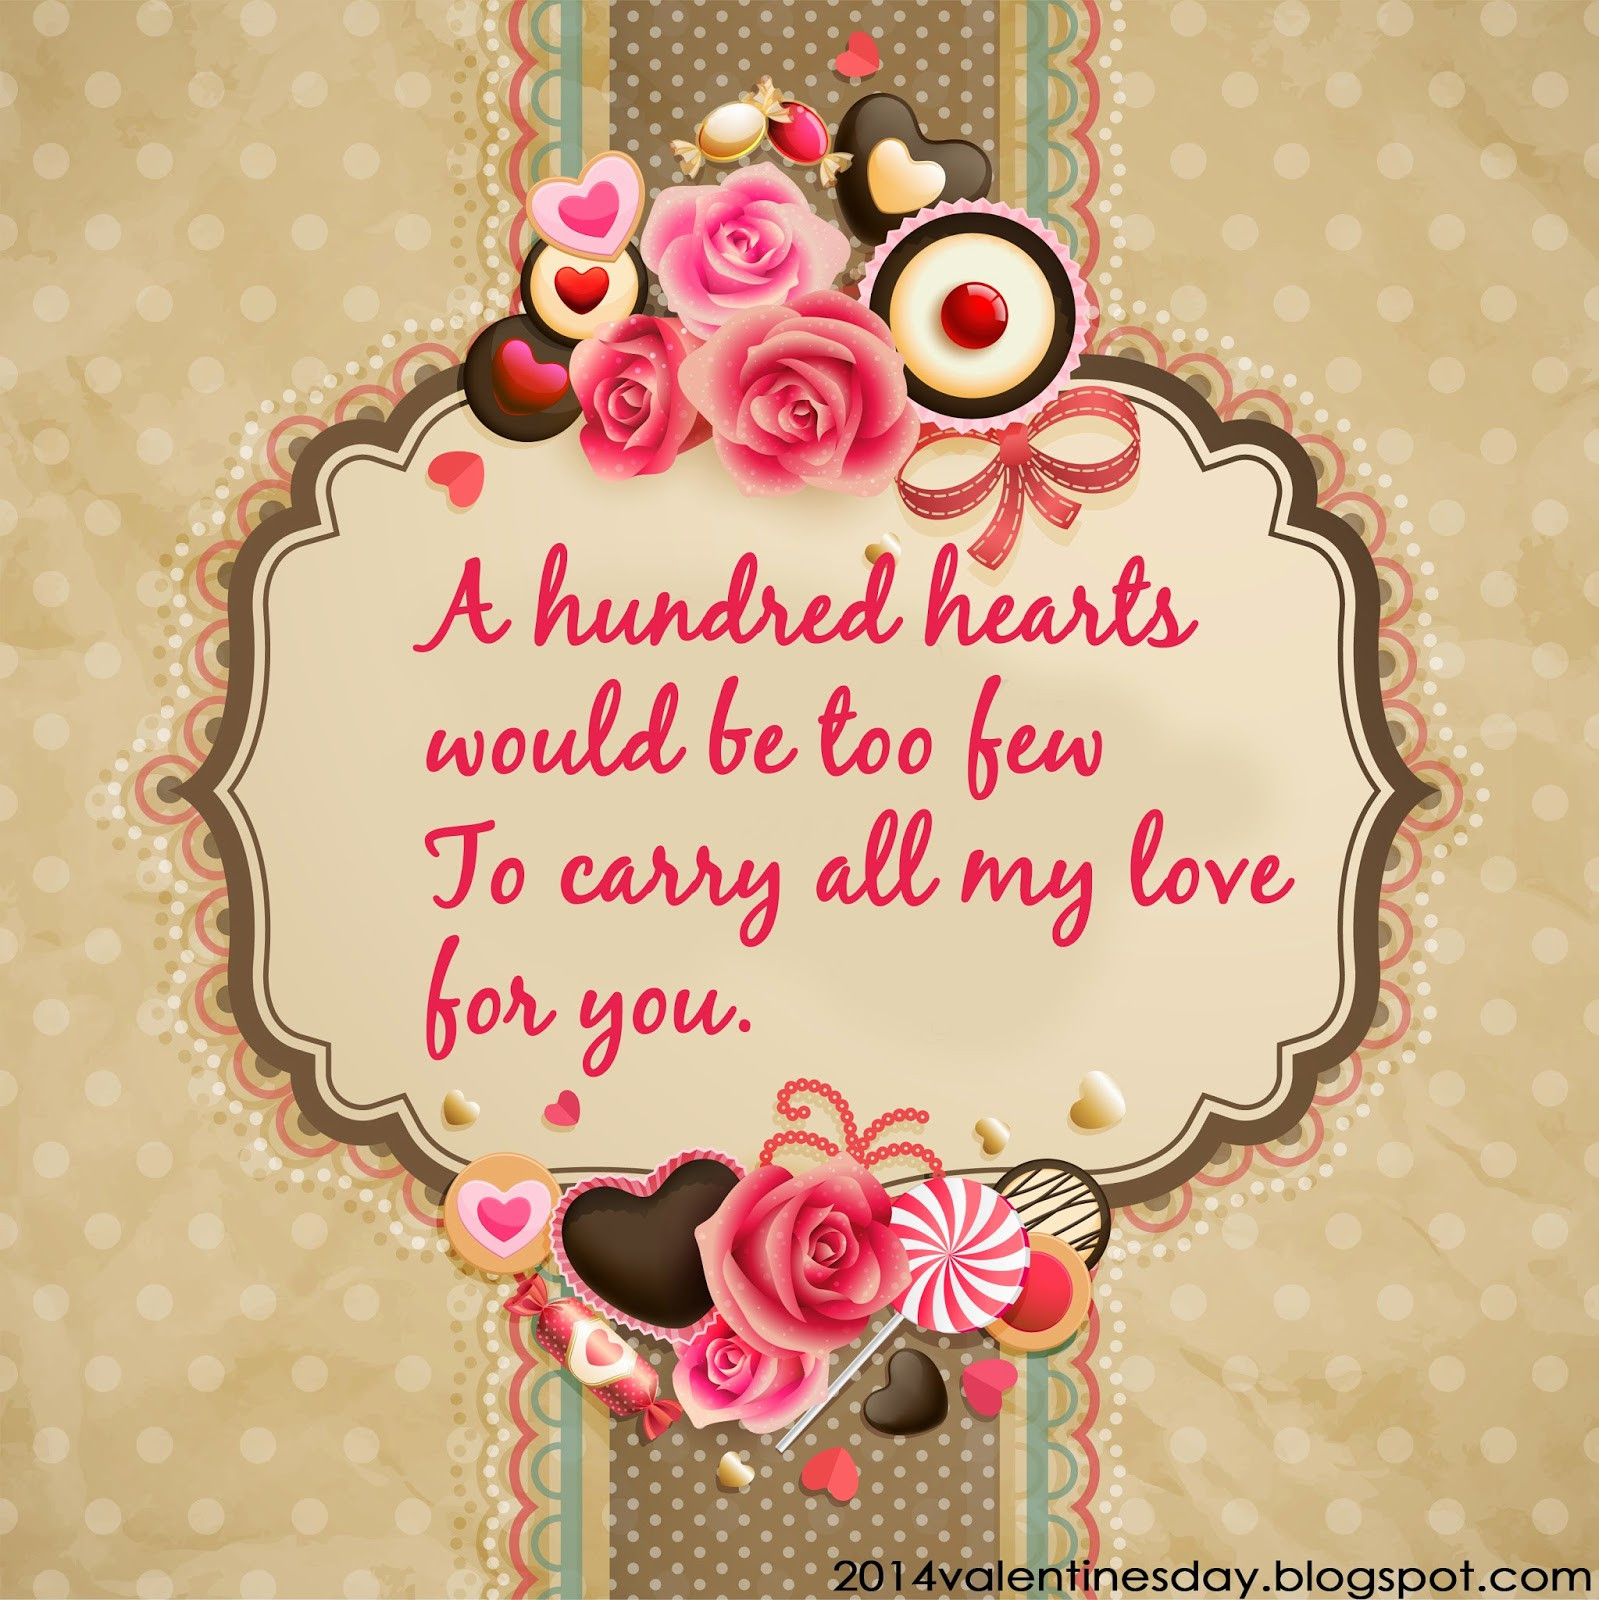 Quotes Valentines Day
 The 7 Best Valentine s Day Quotes 2016